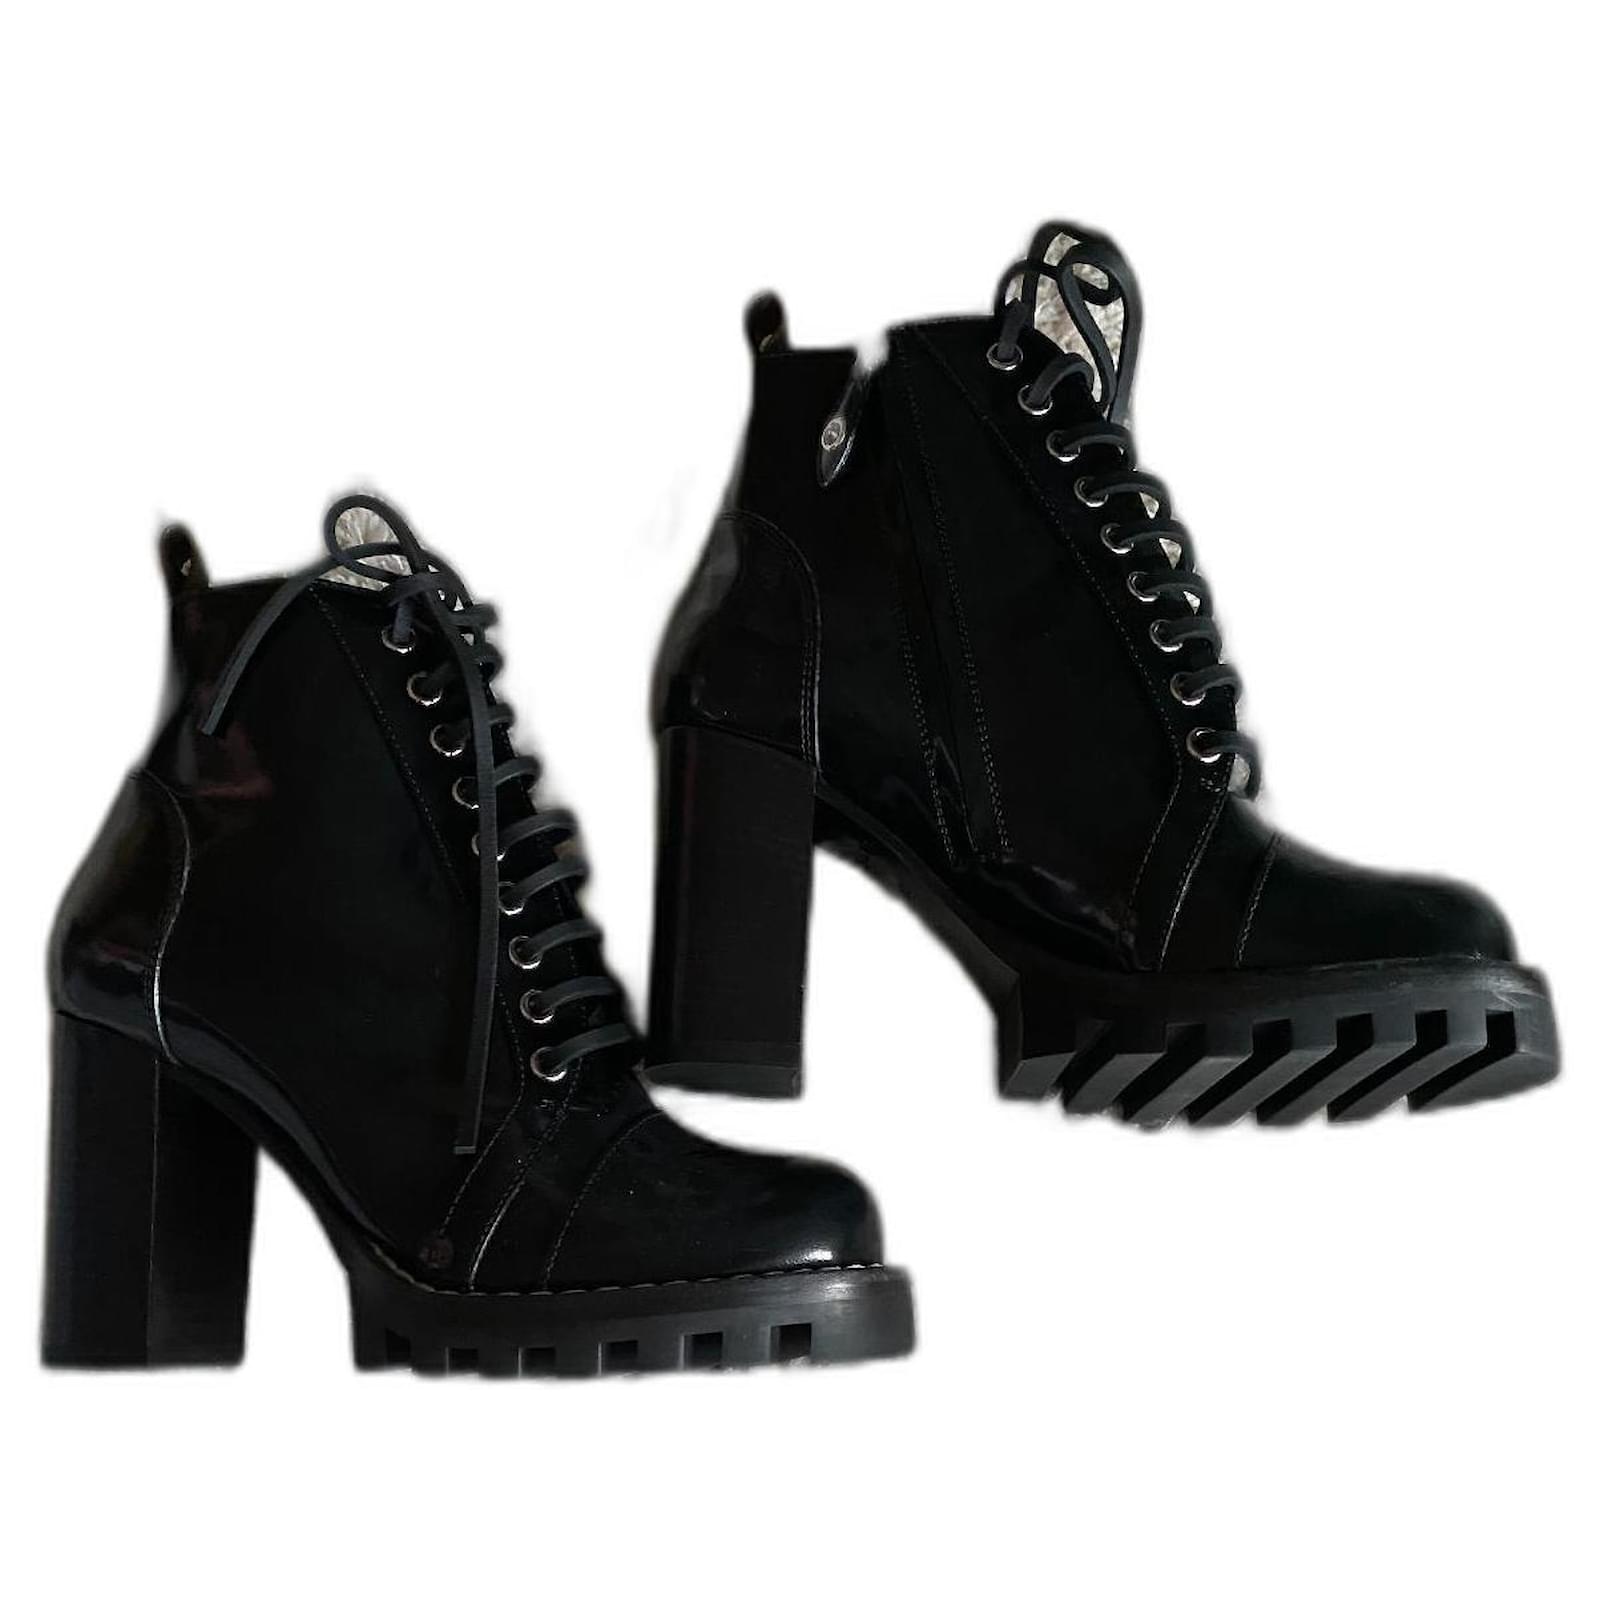 louis vuitton star trail ankle boot price